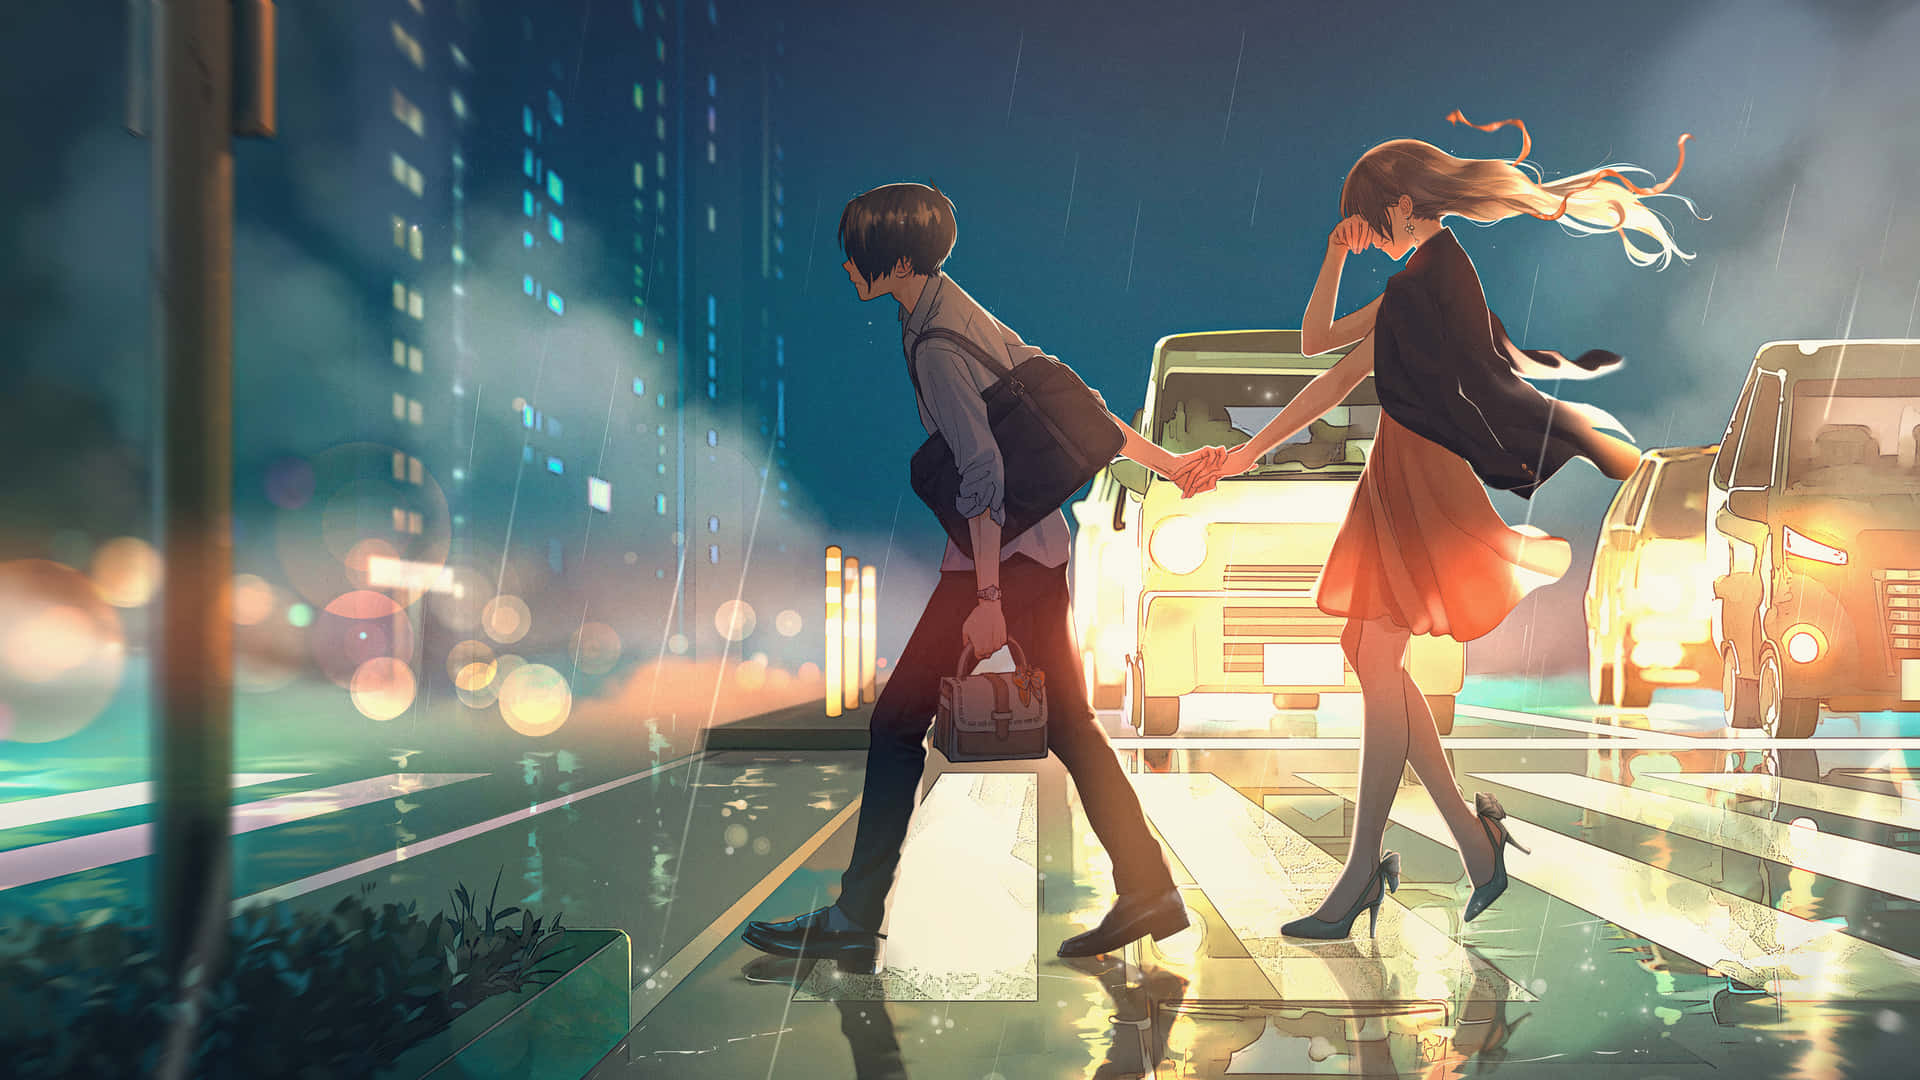 Anime Couple Passing On Pedestrian Crossing Wallpaper